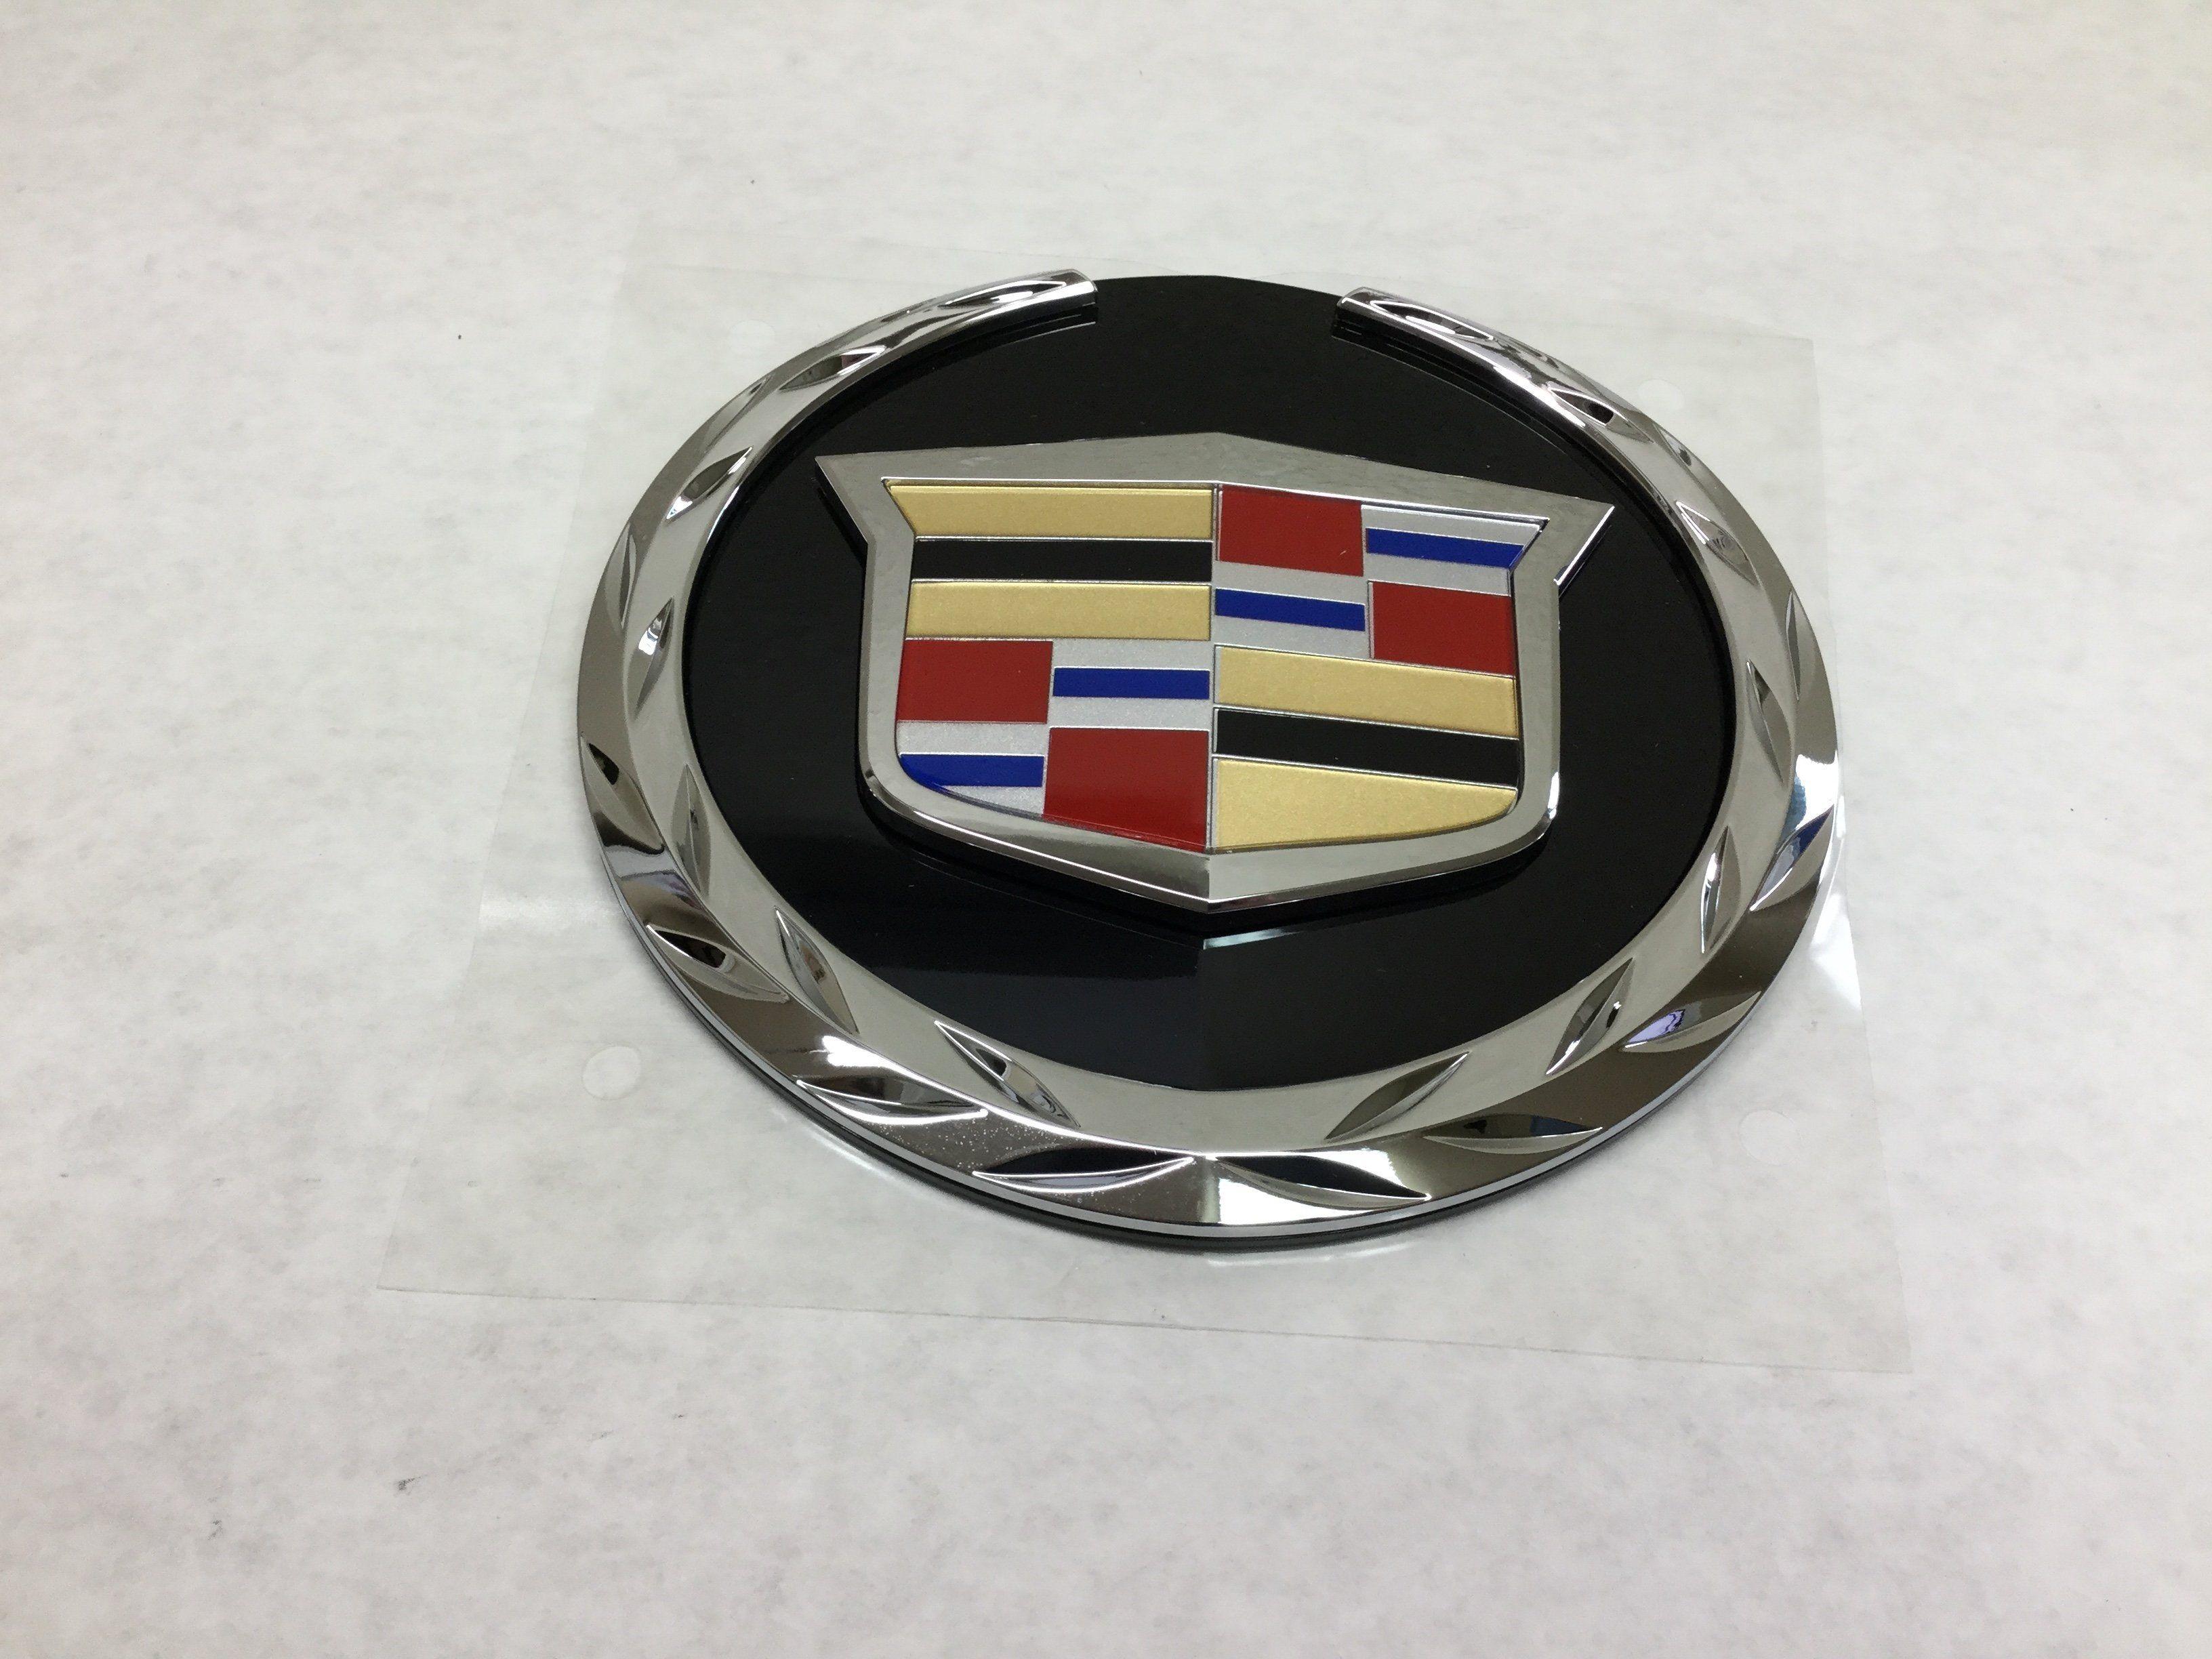 2014 New Cadillac Logo - New 2007 2014 Cadillac Escalade Front Grille Crest And Wreath